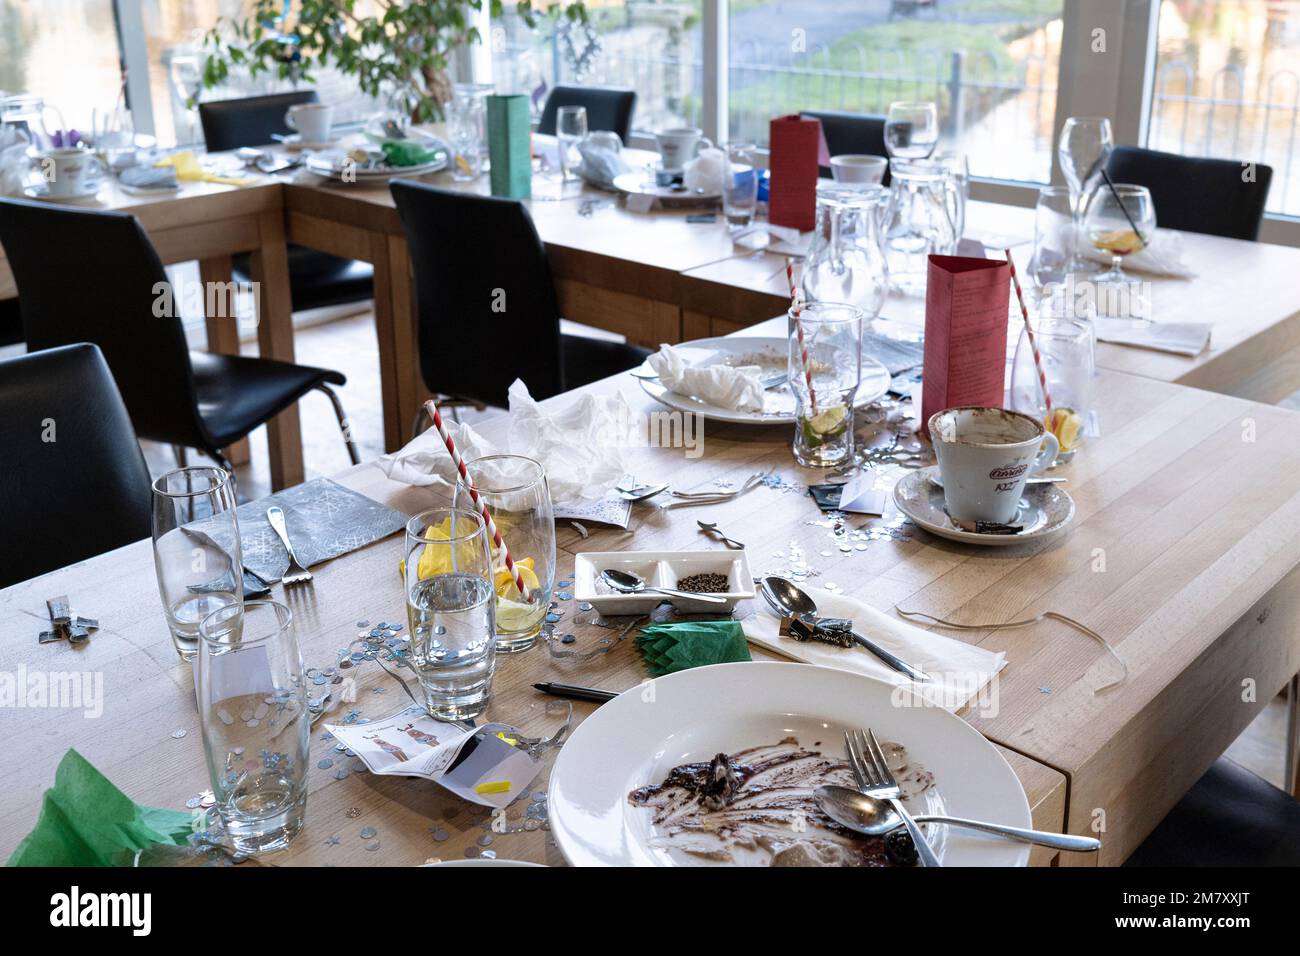 The remains of a Christmas meal on a table in a restaurant. Stock Photo